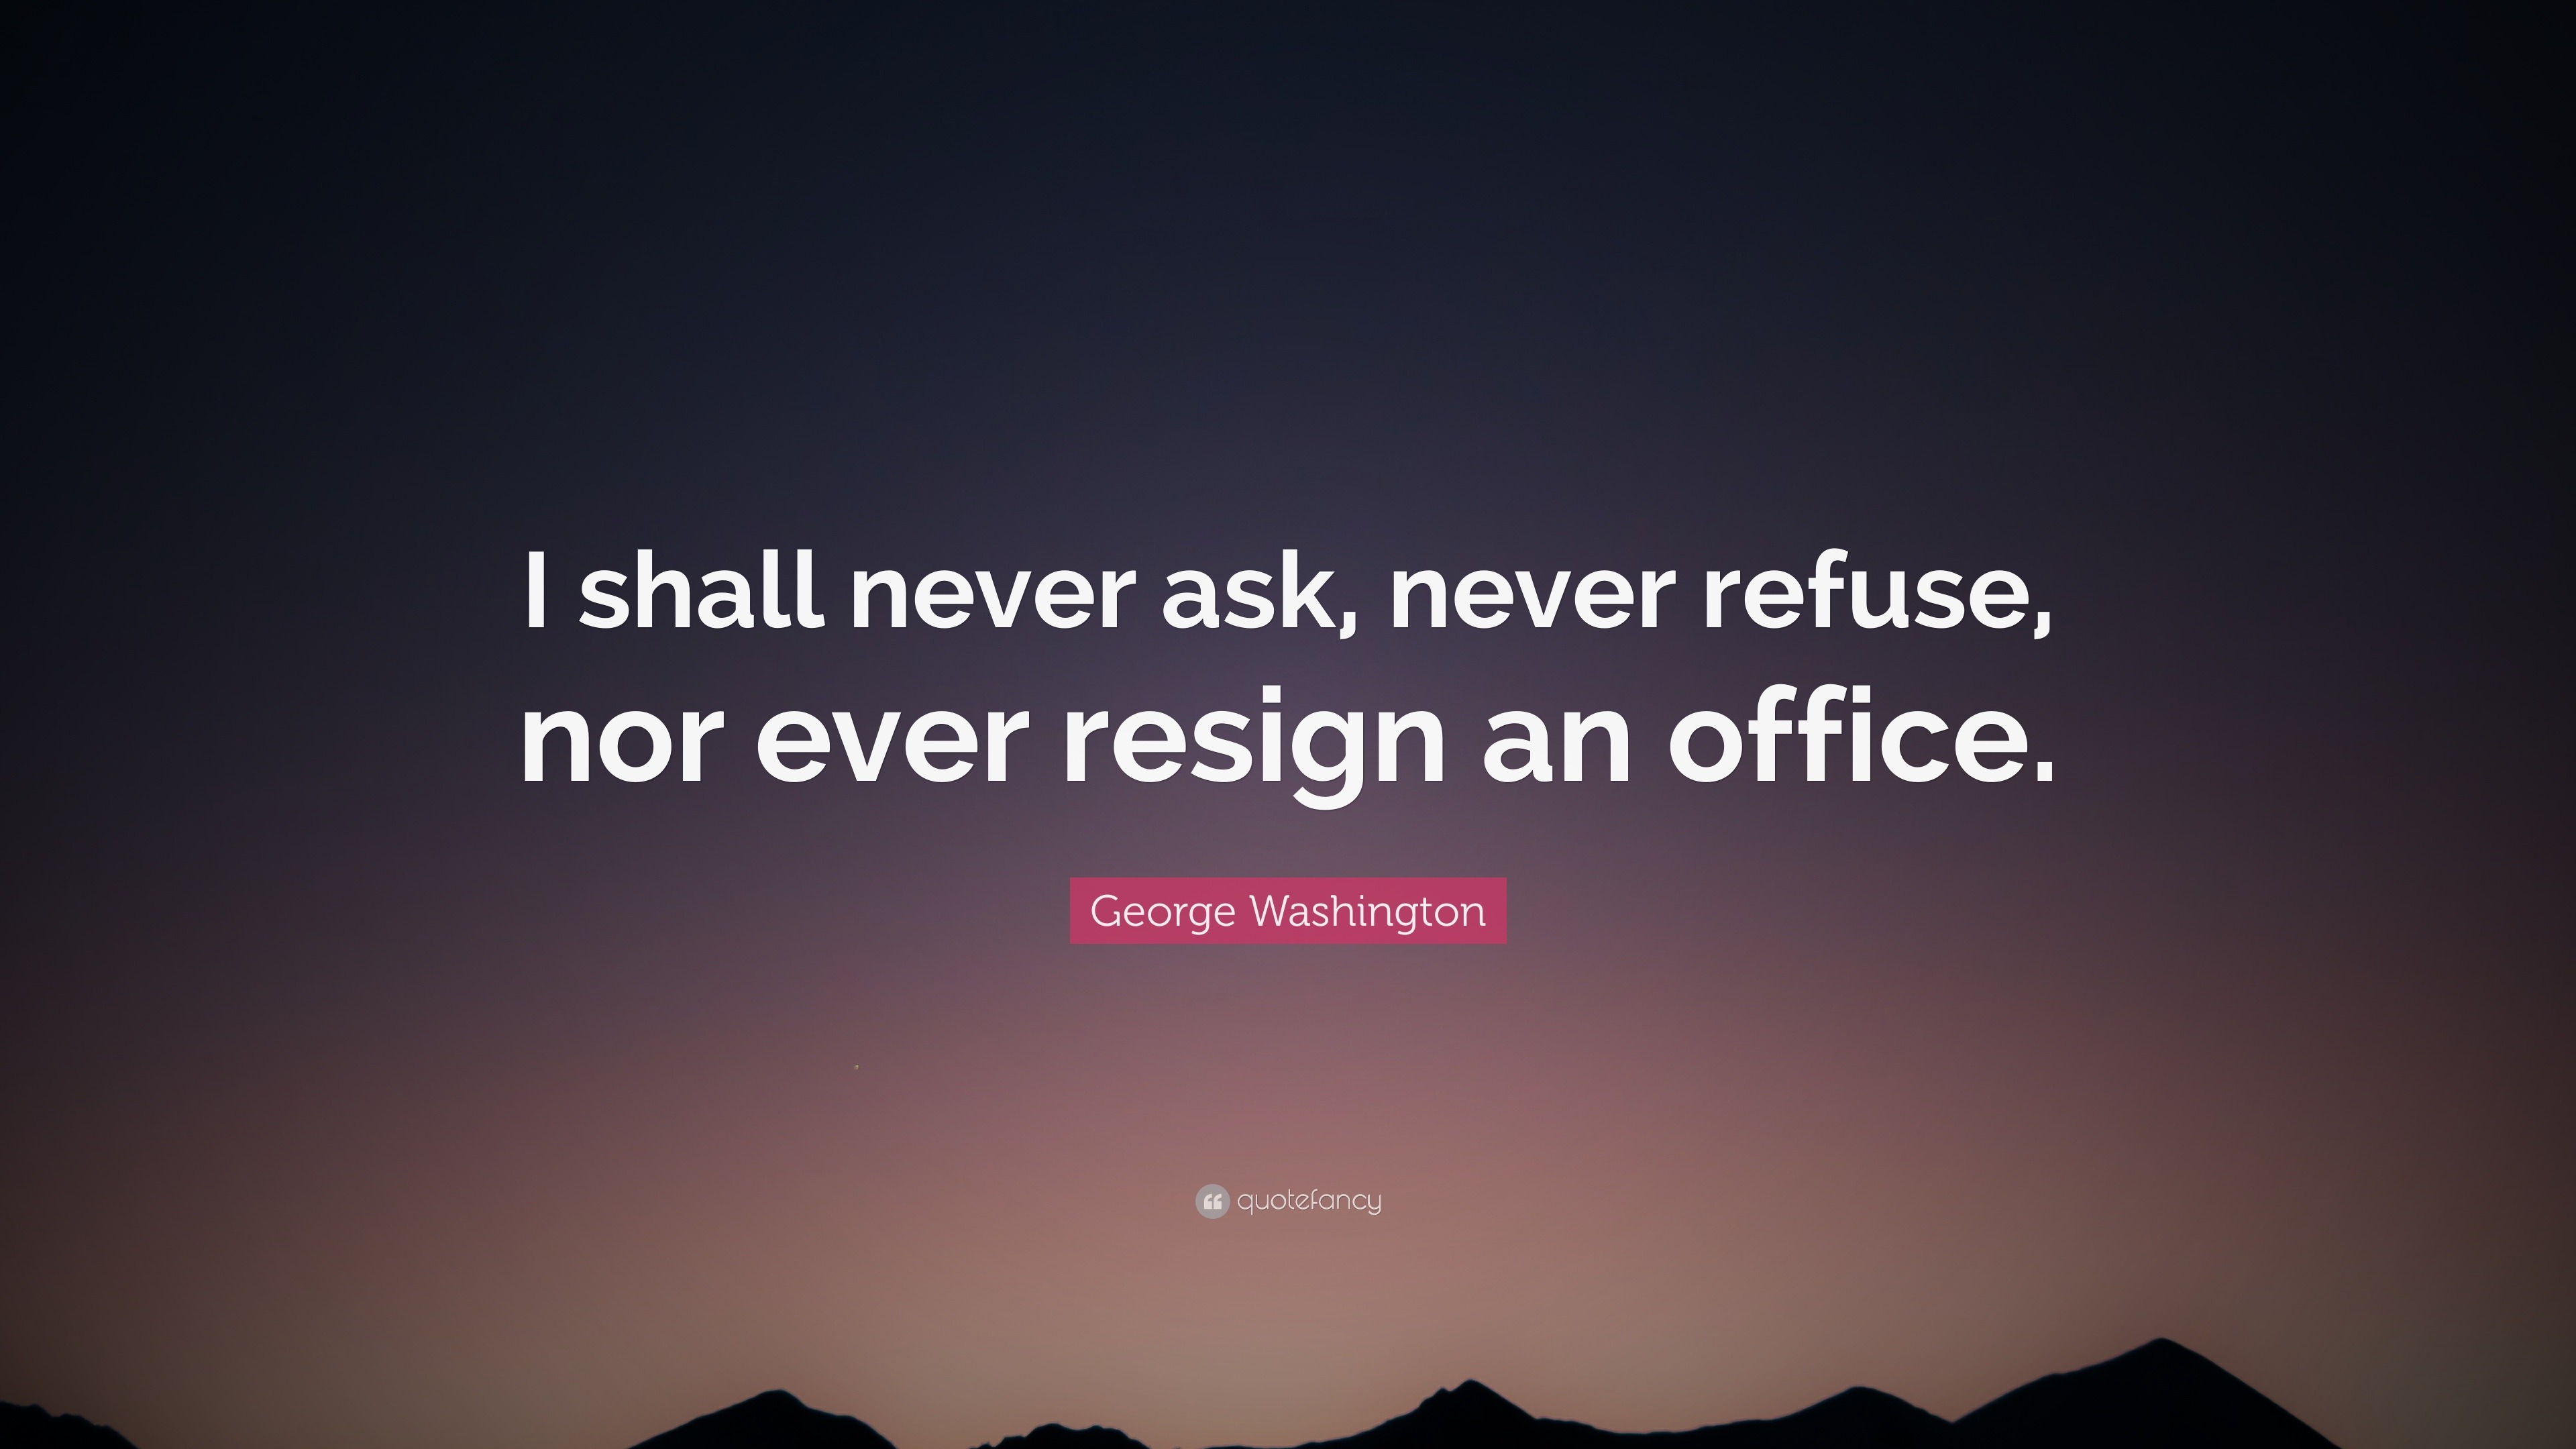 George Washington Quote “i Shall Never Ask Never Refuse Nor Ever Resign An Office” 